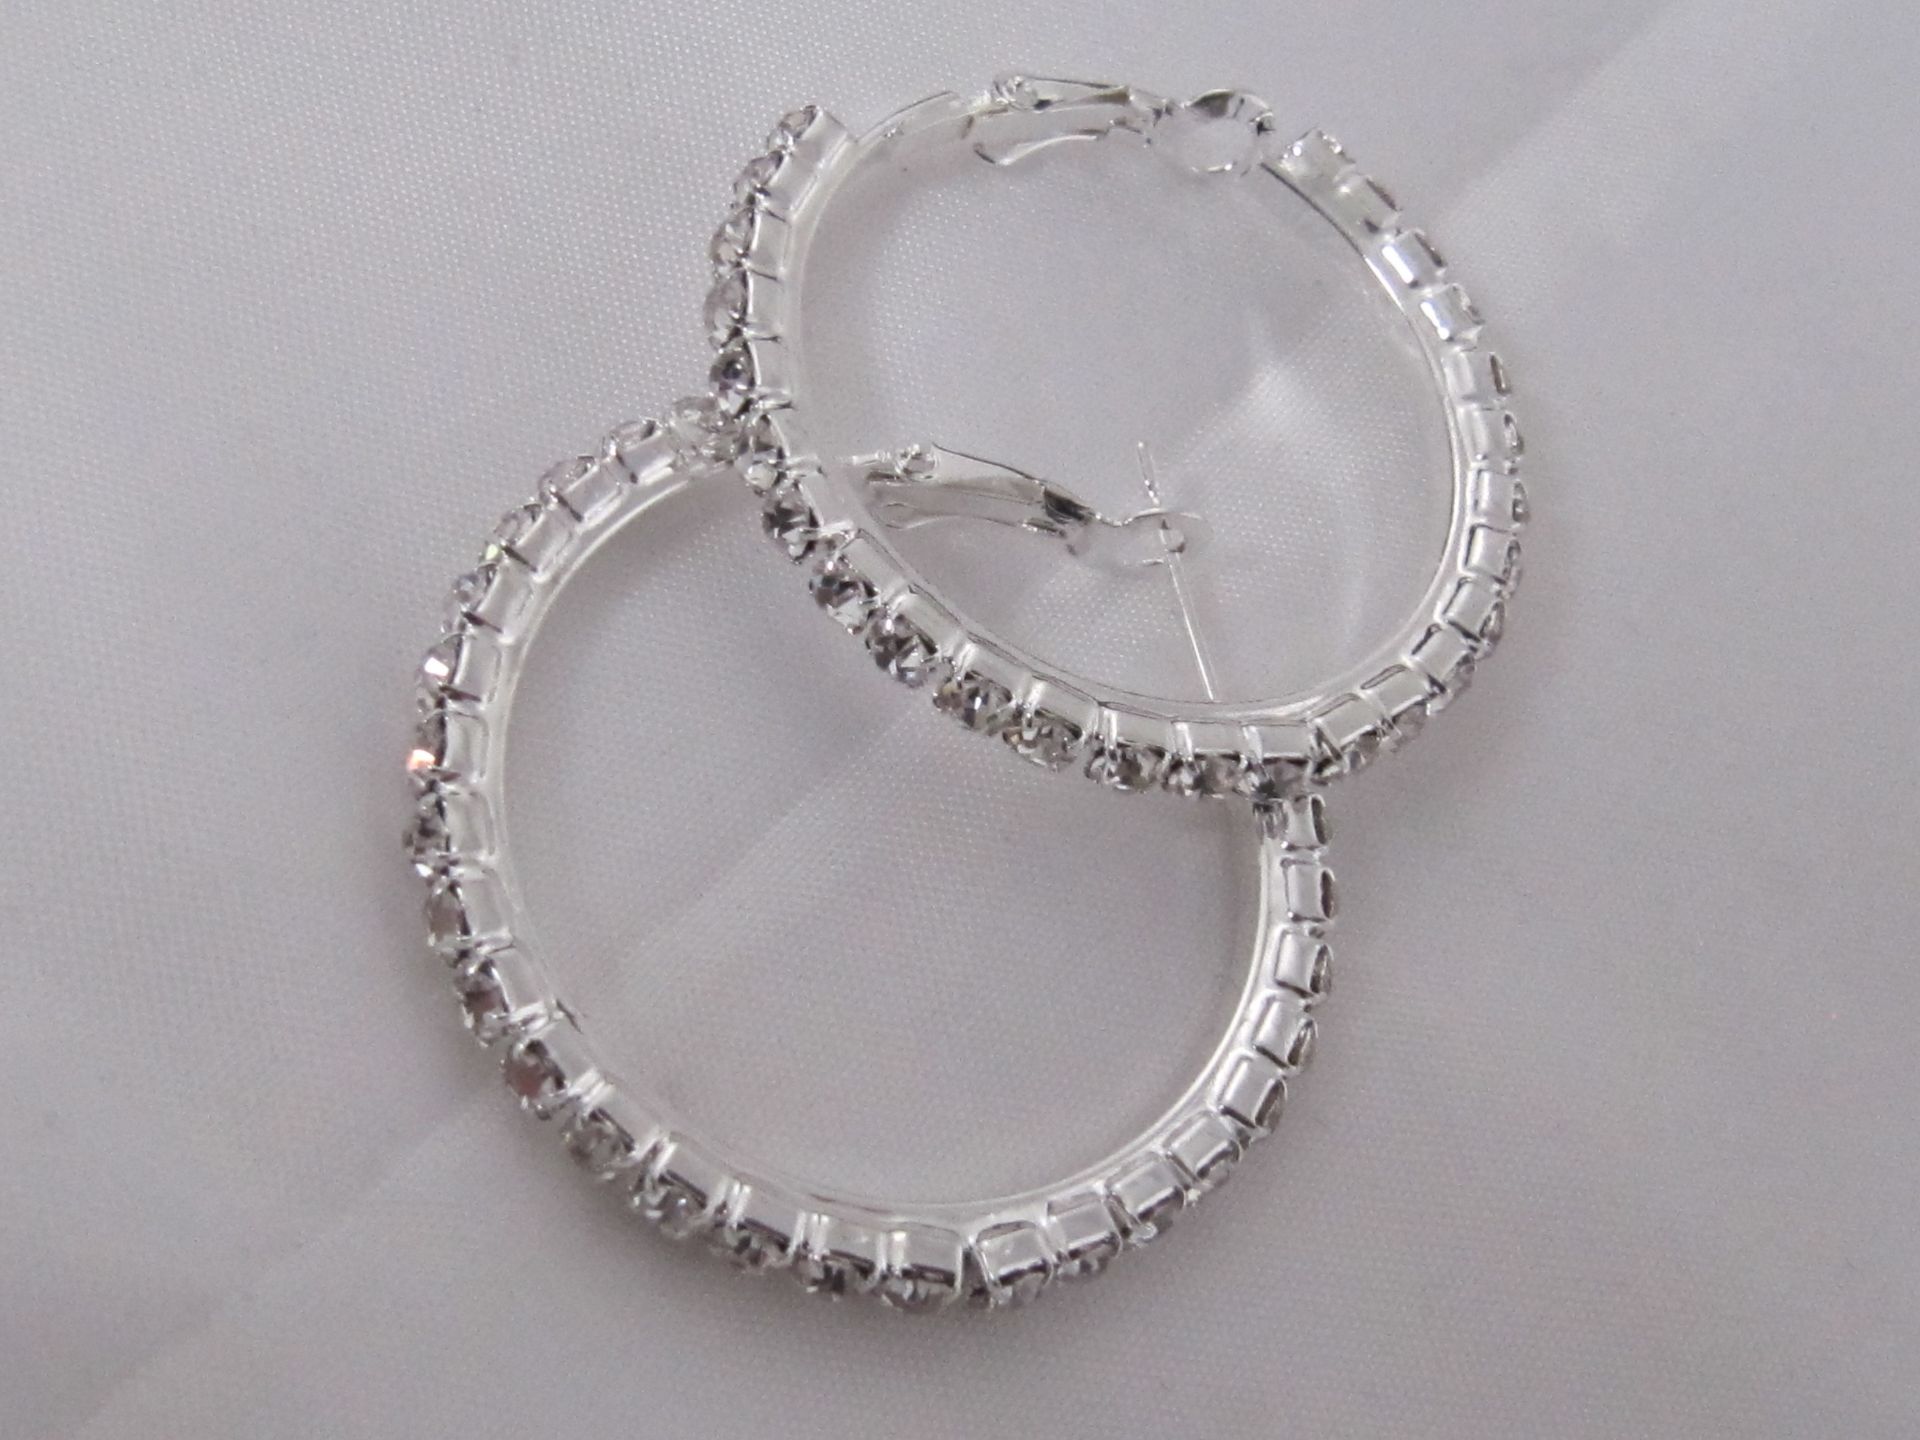 Earrings made with Swarovski Elements. - Image 4 of 4